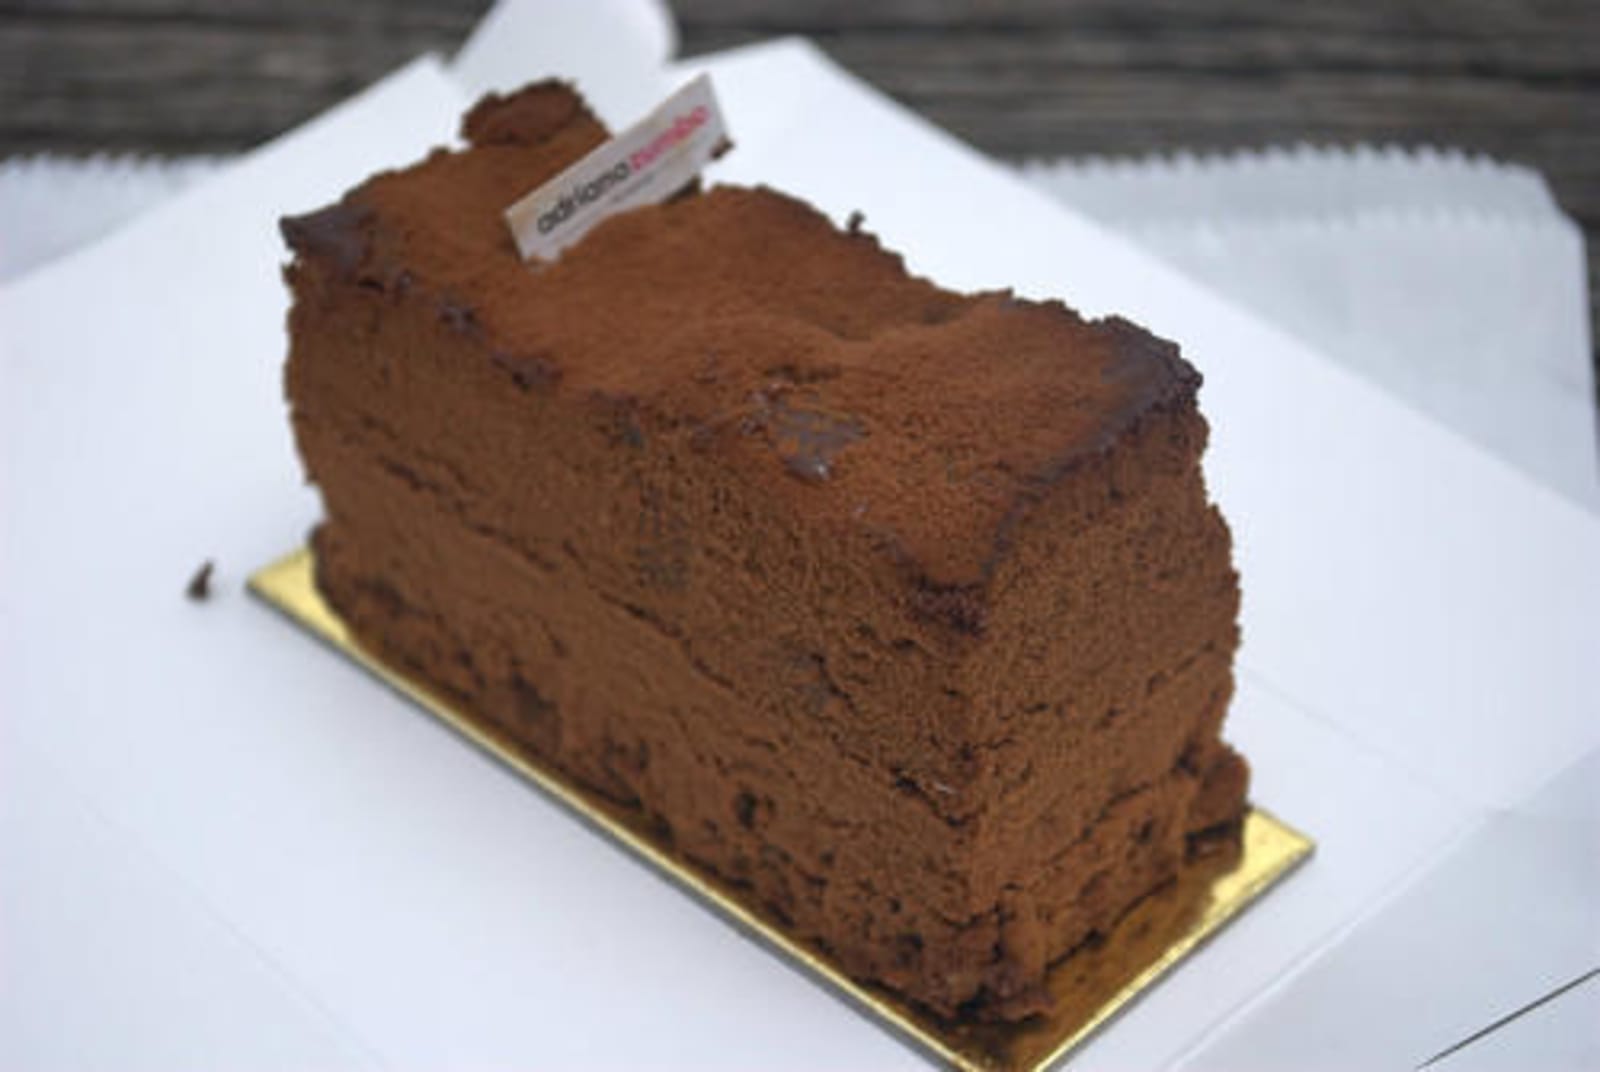 A thin slice of light brown cake, likely chocolate flavoured